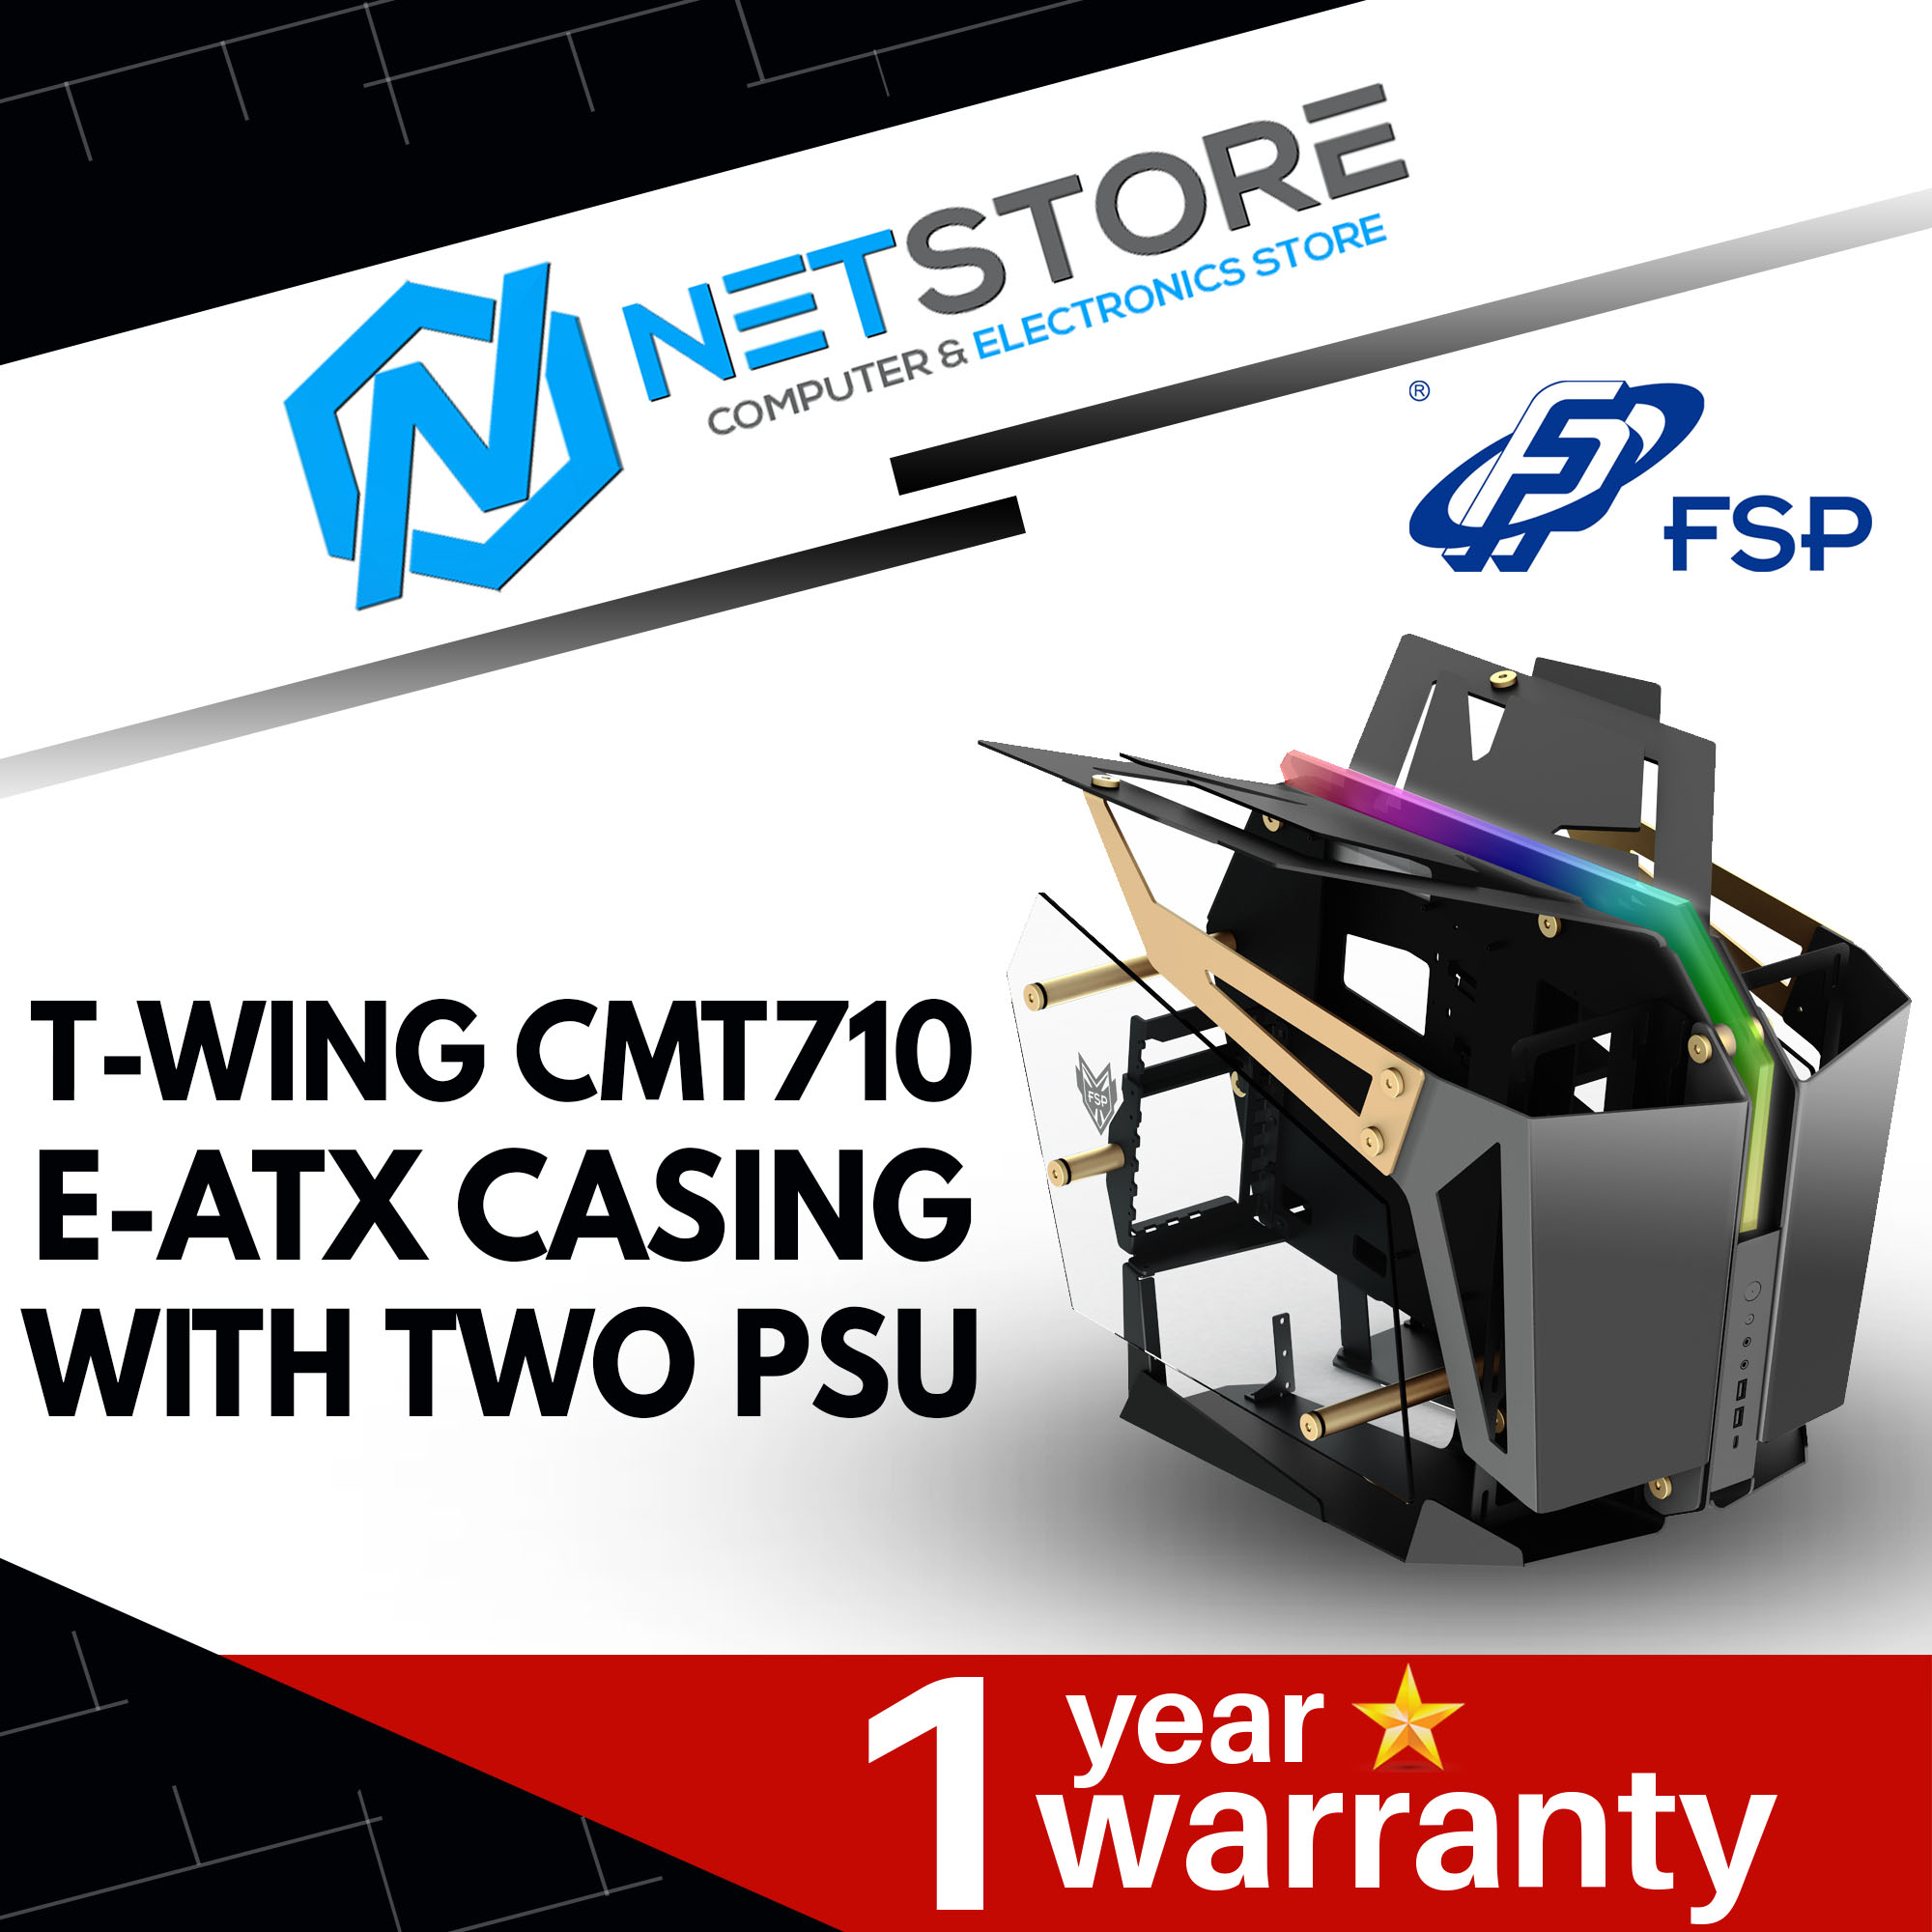 FSP T-WING CMT710 E-ATX CASING WITH TWO PSU - FSP-CMT710